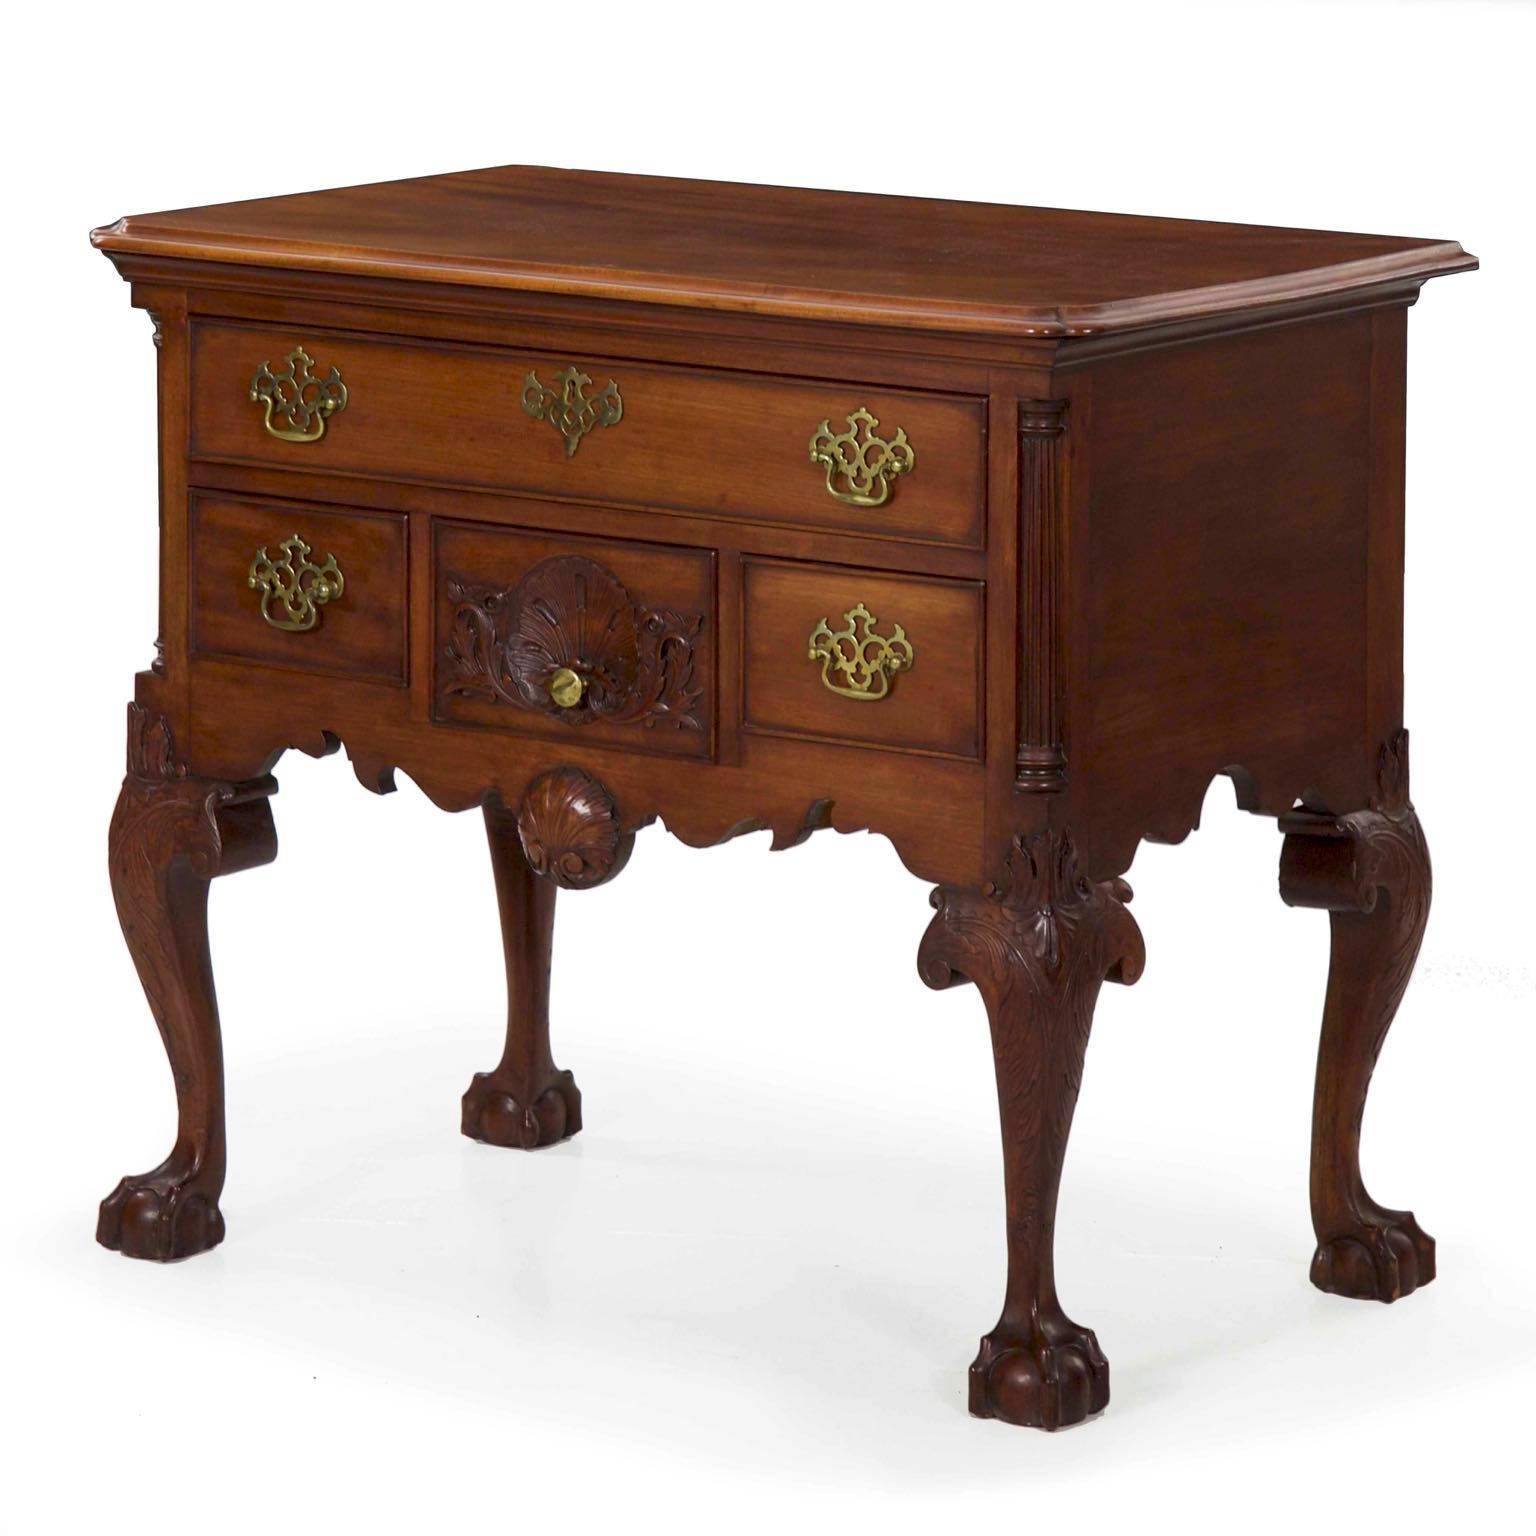 This is a beautifully handmade reproduction Chippendale lowboy chest of drawers in the Philadelphia tradition. Crafted out of solid mahogany, the top is inverted in the front corners with integral thumb molding, this projecting over the cove molding